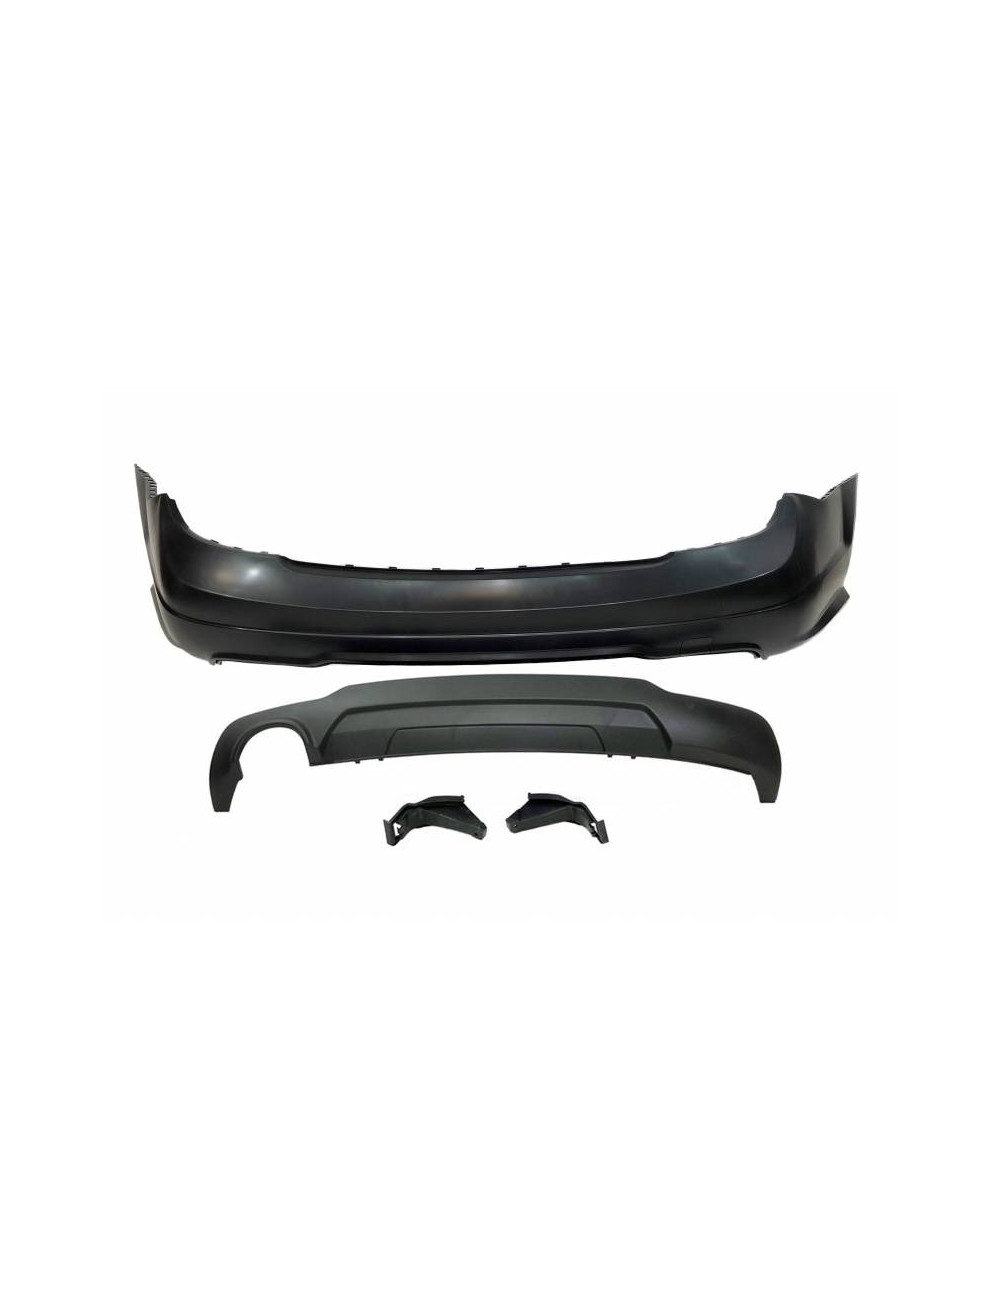 PARAURTI POSTERIORE MERCEDES W204 07-13 2-4P 1 SCARICO LOOK AMG ABS